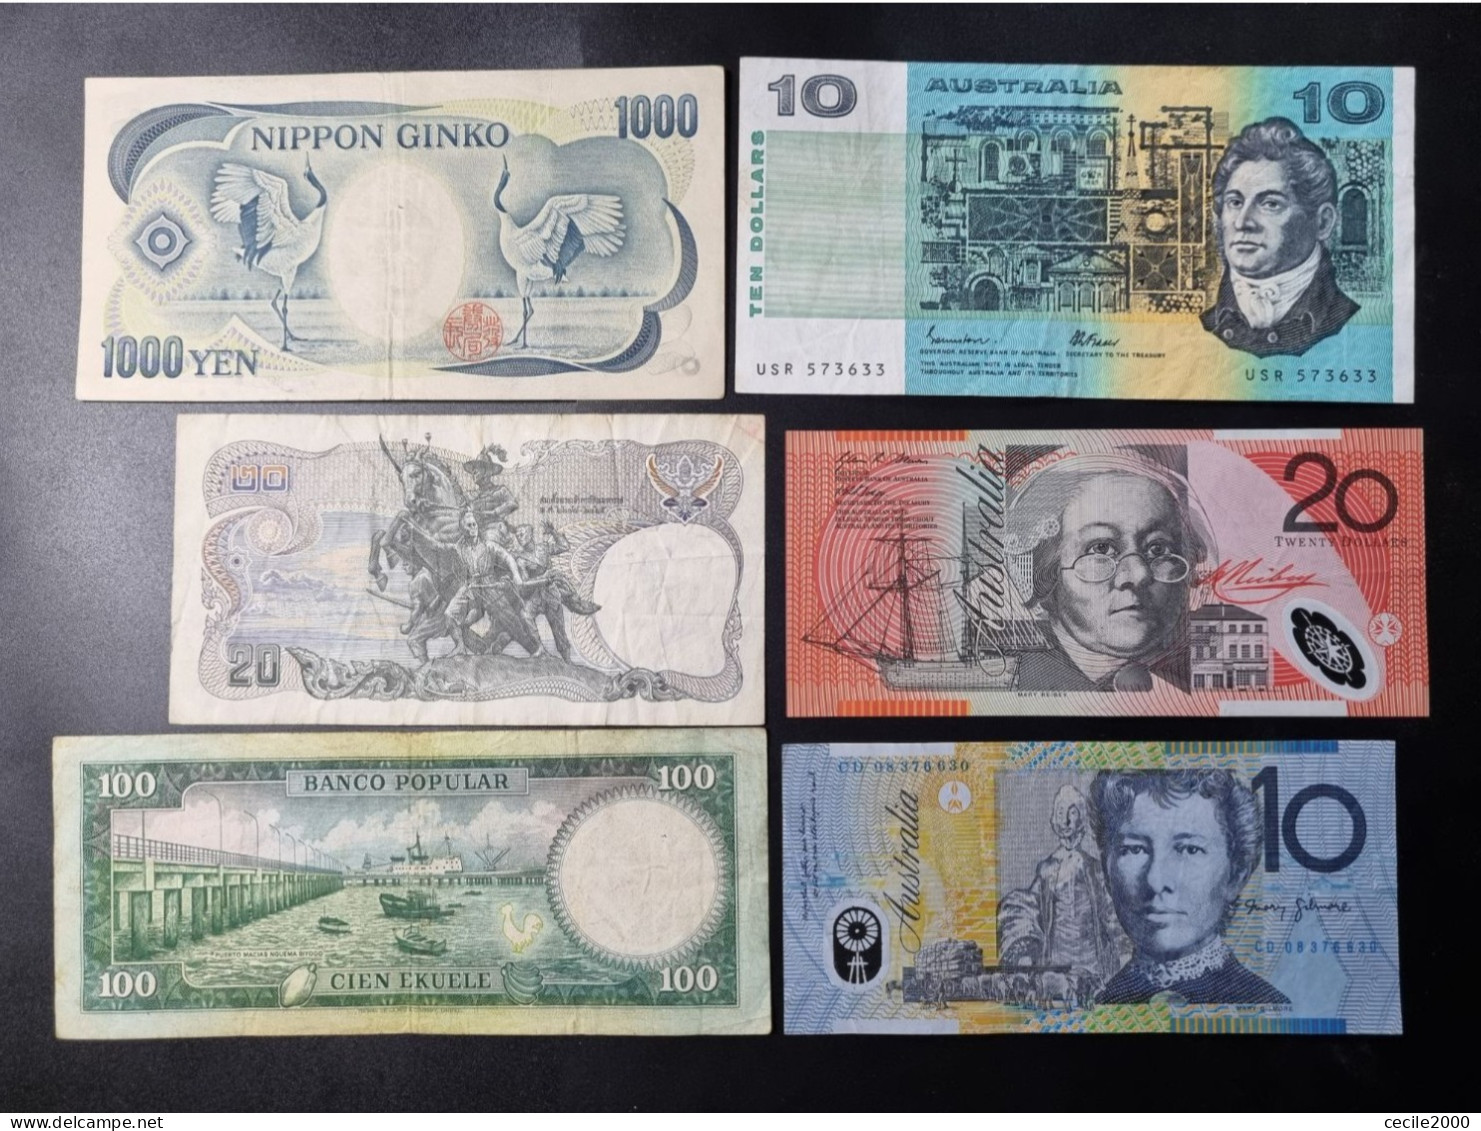 WORLD BANKNOTE LOT AUSTRALIA, JAPAN, THAILAND, GUINEE / LOTE 6 BILLETES MUNDIALES *COMPRAS MULTIPLES CONSULTAR - Russia